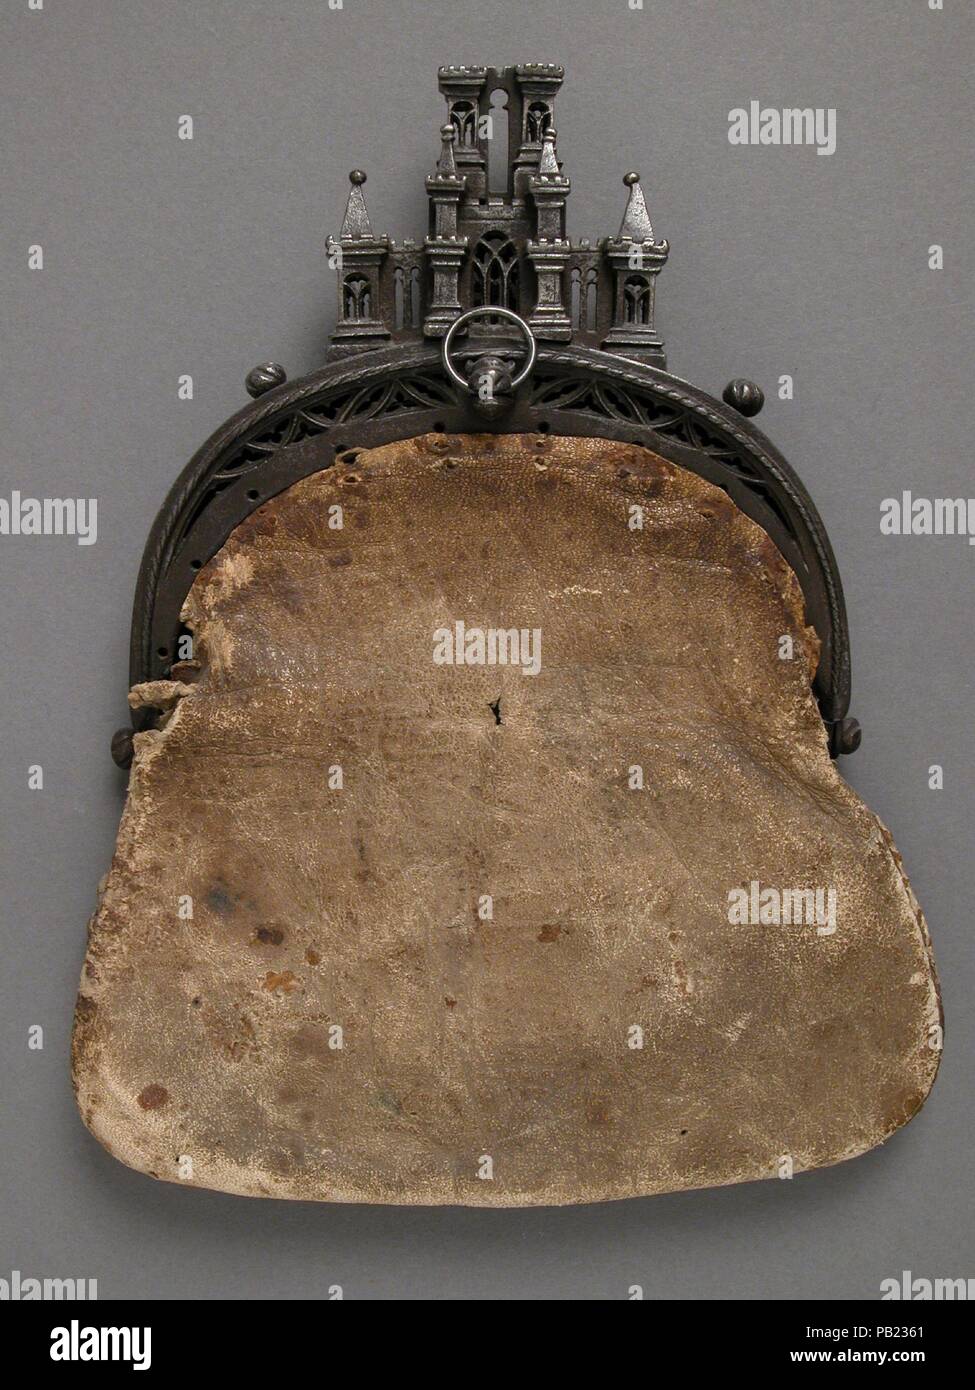 Purse. Culture: European. Dimensions: Overall: 9 x 7 1/16 x 1 5/8 in. (22.9 x 17.9 x 4.1 cm)  purse clasp only: 5 x 6 x 1 5/8 in. (12.7 x 15.2 x 4.1 cm). Date: 15th-16th century.  Purses of various shapes and sizes, carried by both men and women, were given descriptive terms in medieval inventories, such as bourse or poche à compartement. In the fifteenth century, purses with clasps of metal and loops on the rear which could be attached directly to the belt superseded the pouches which closed with drawstrings and hung from the belt. The clasp no doubt came into use to provide greater security  Stock Photo